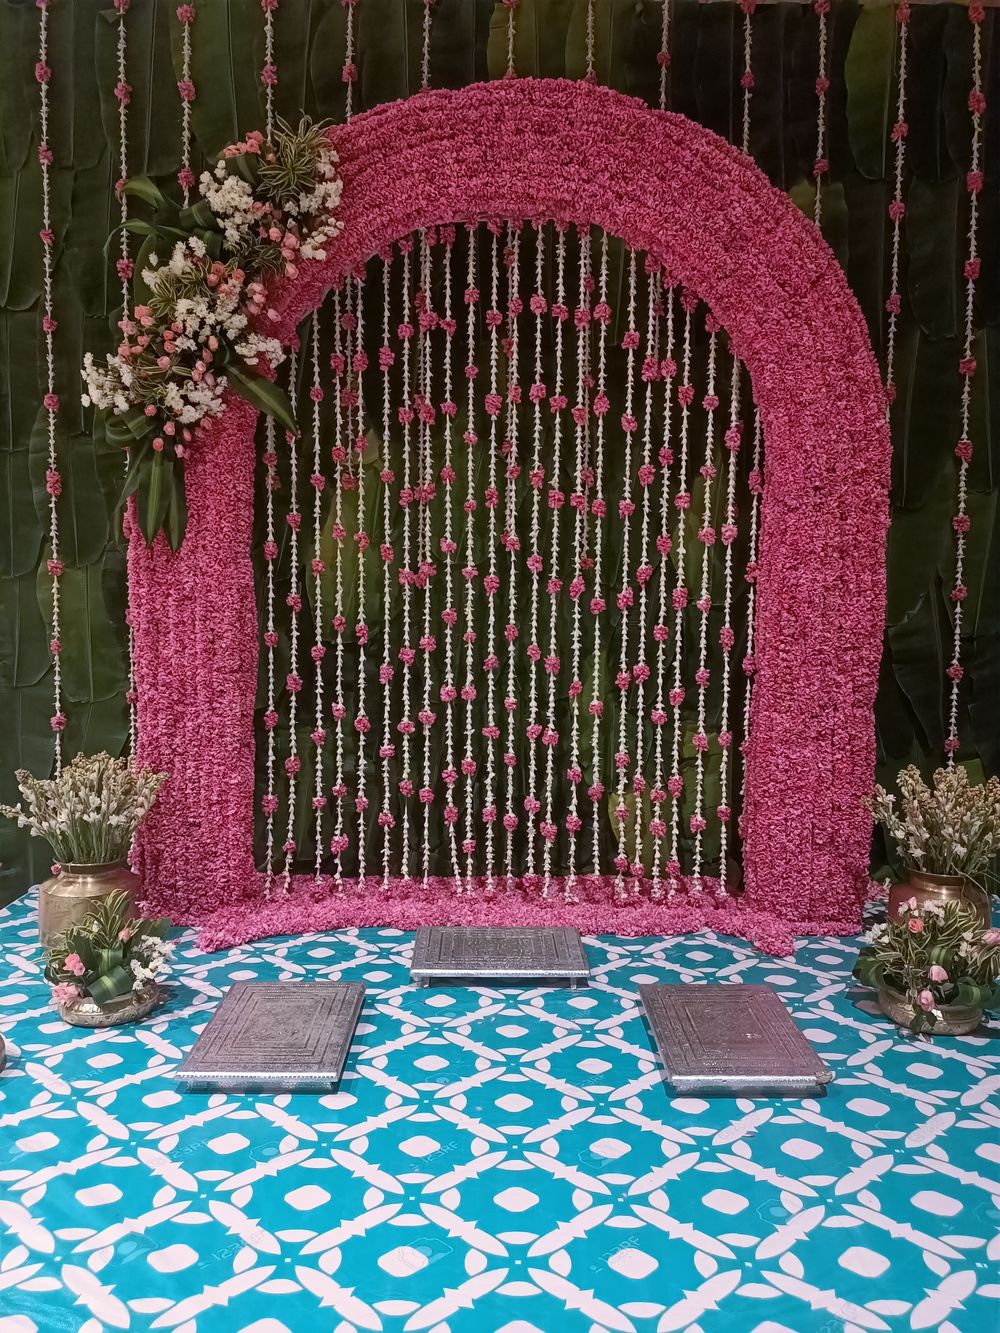 Photo From A surreal decor sure to make you skip a heartbeat - By Eventina Decors